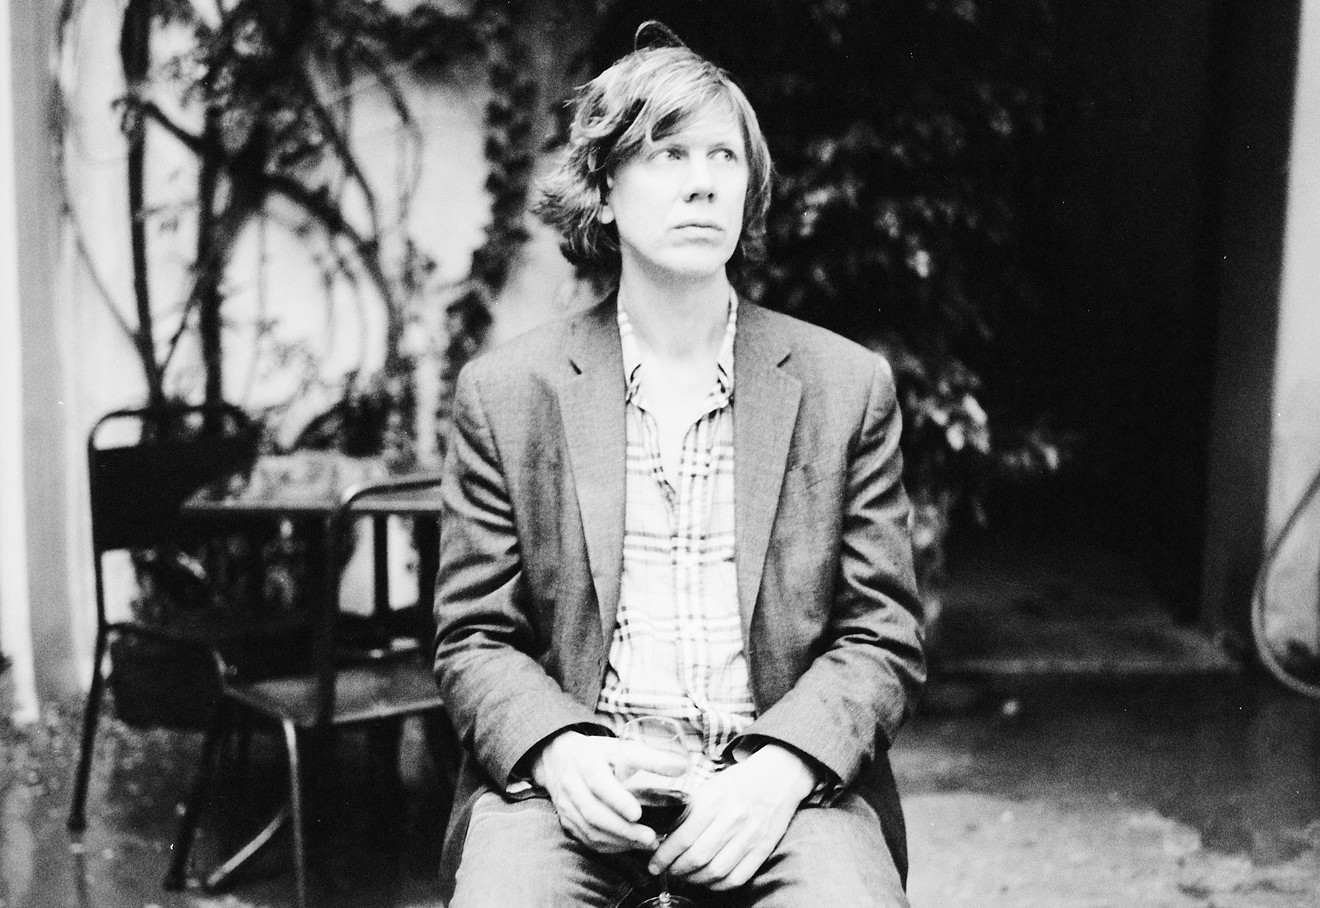 Thurston Moore is scheduled to perform at Valley Bar on Monday, October 16.